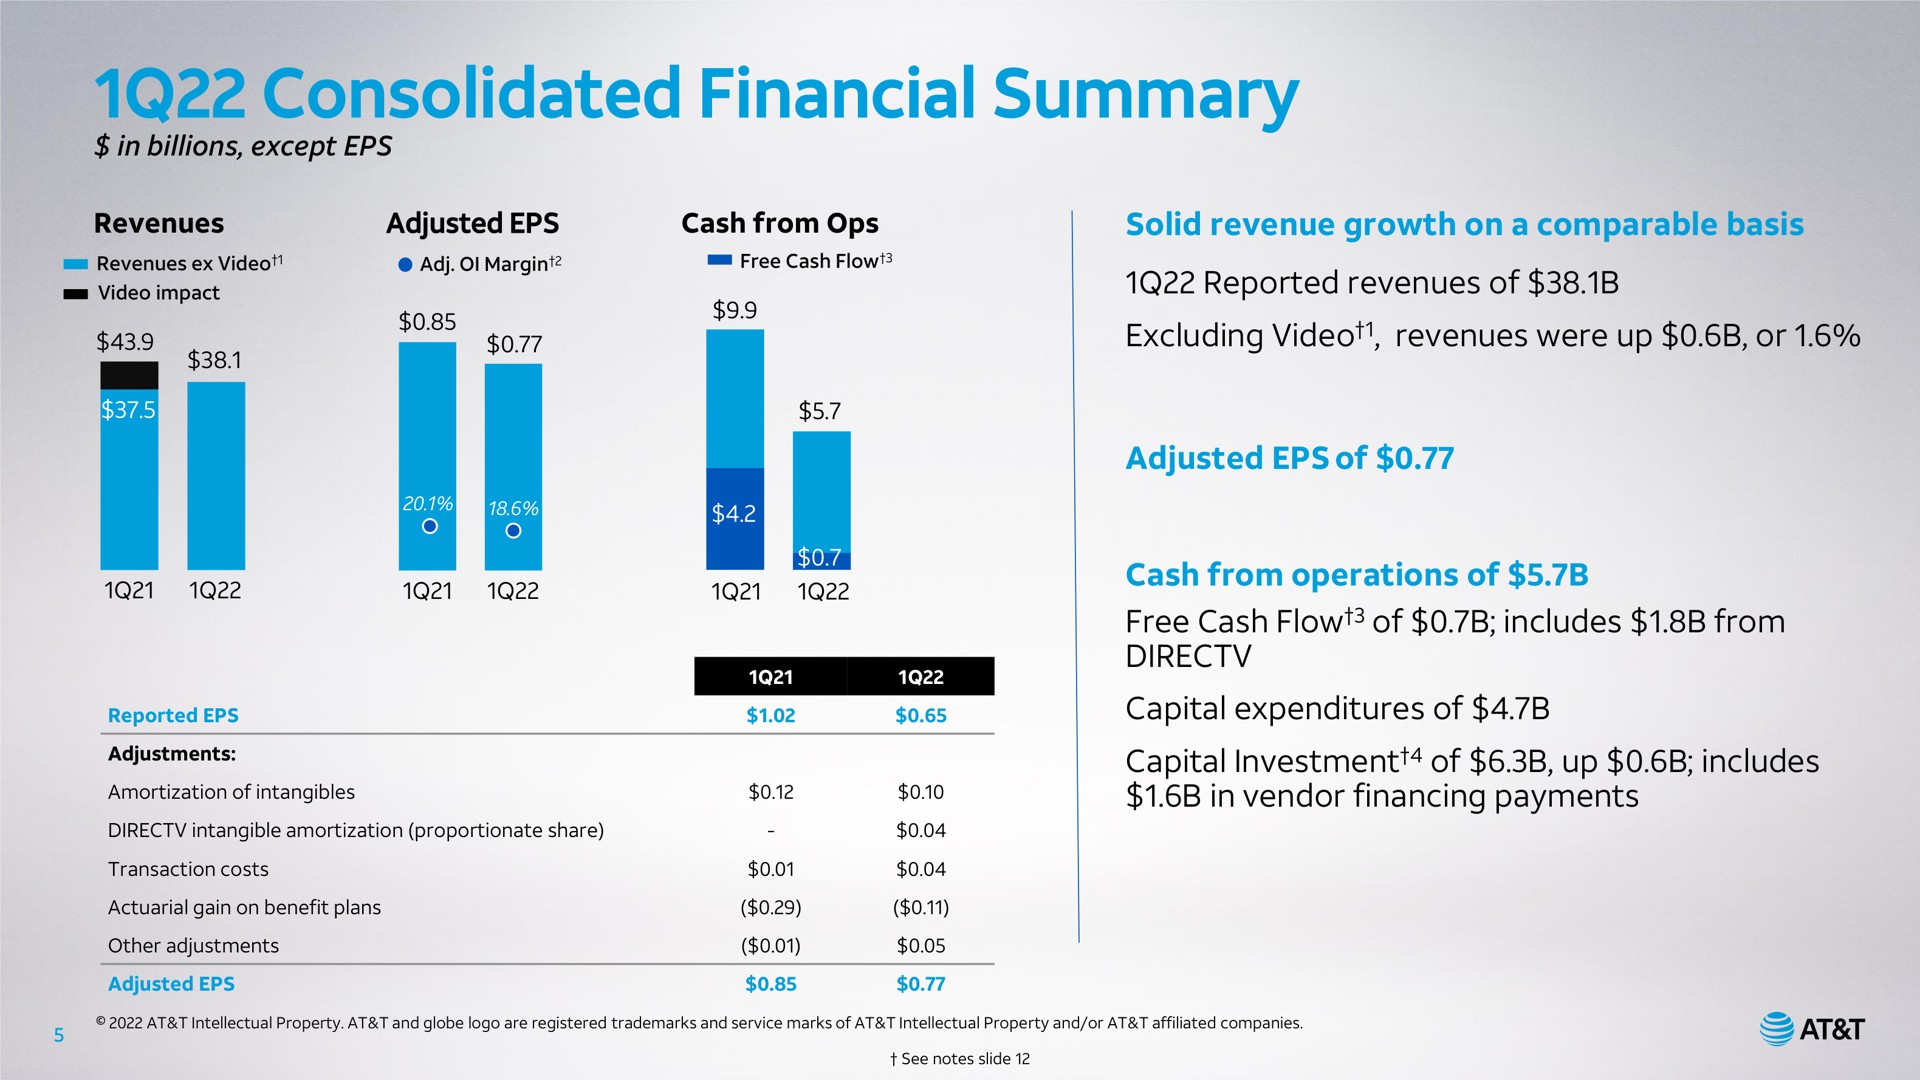 consolidated financial summary reported revenues of excluding video revenues were up or a adjusted of from operations of cash ash of capital investment of up includes at | AT&T